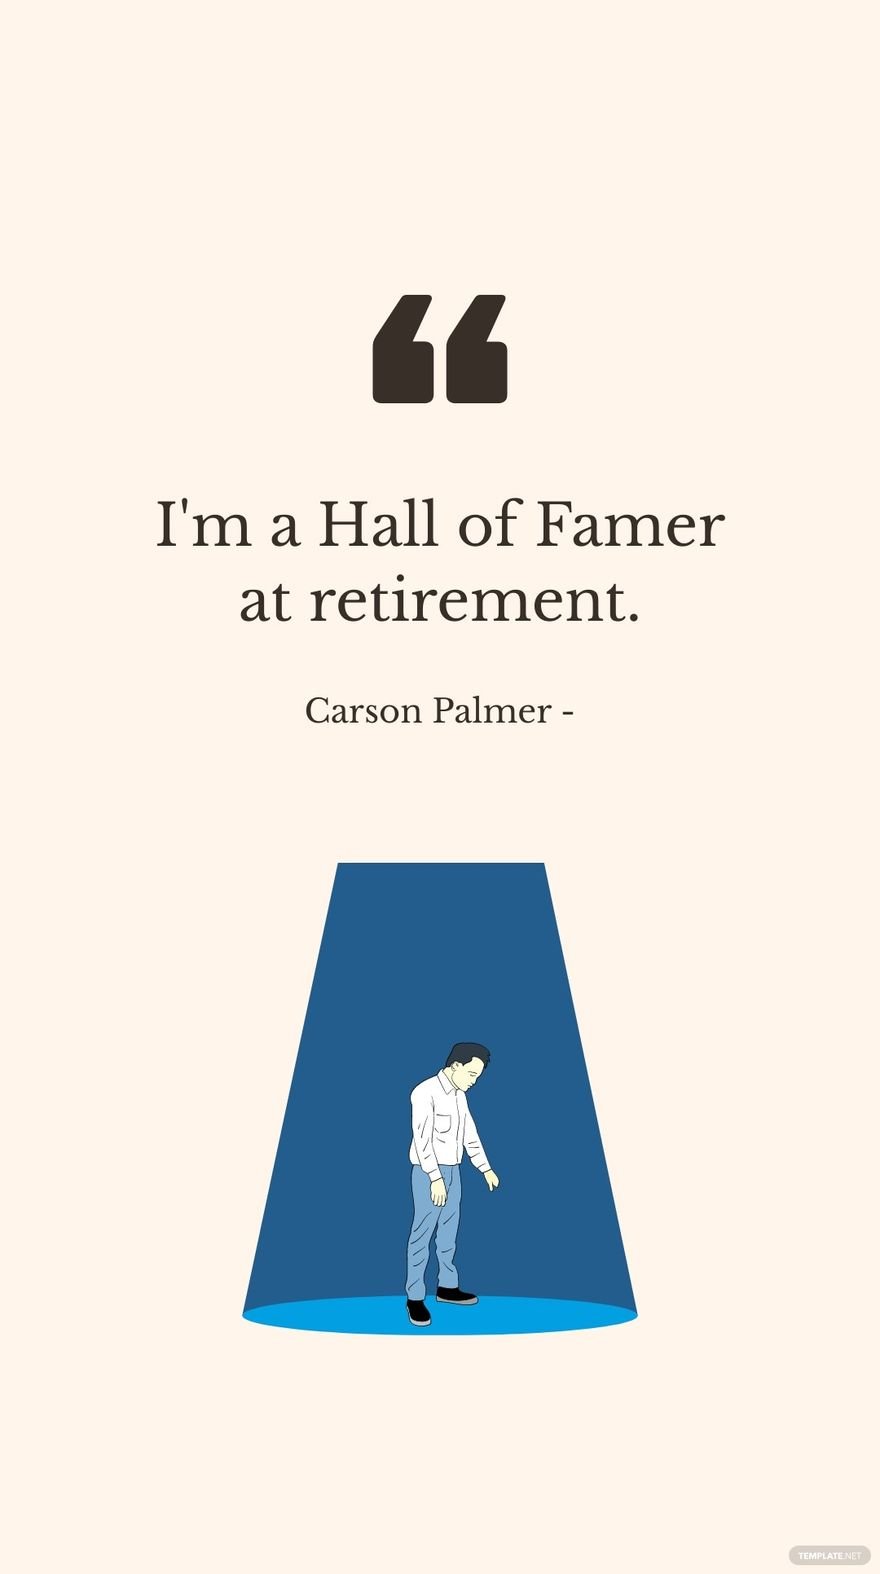 Free Carson Palmer - I'm a Hall of Famer at retirement. in JPG